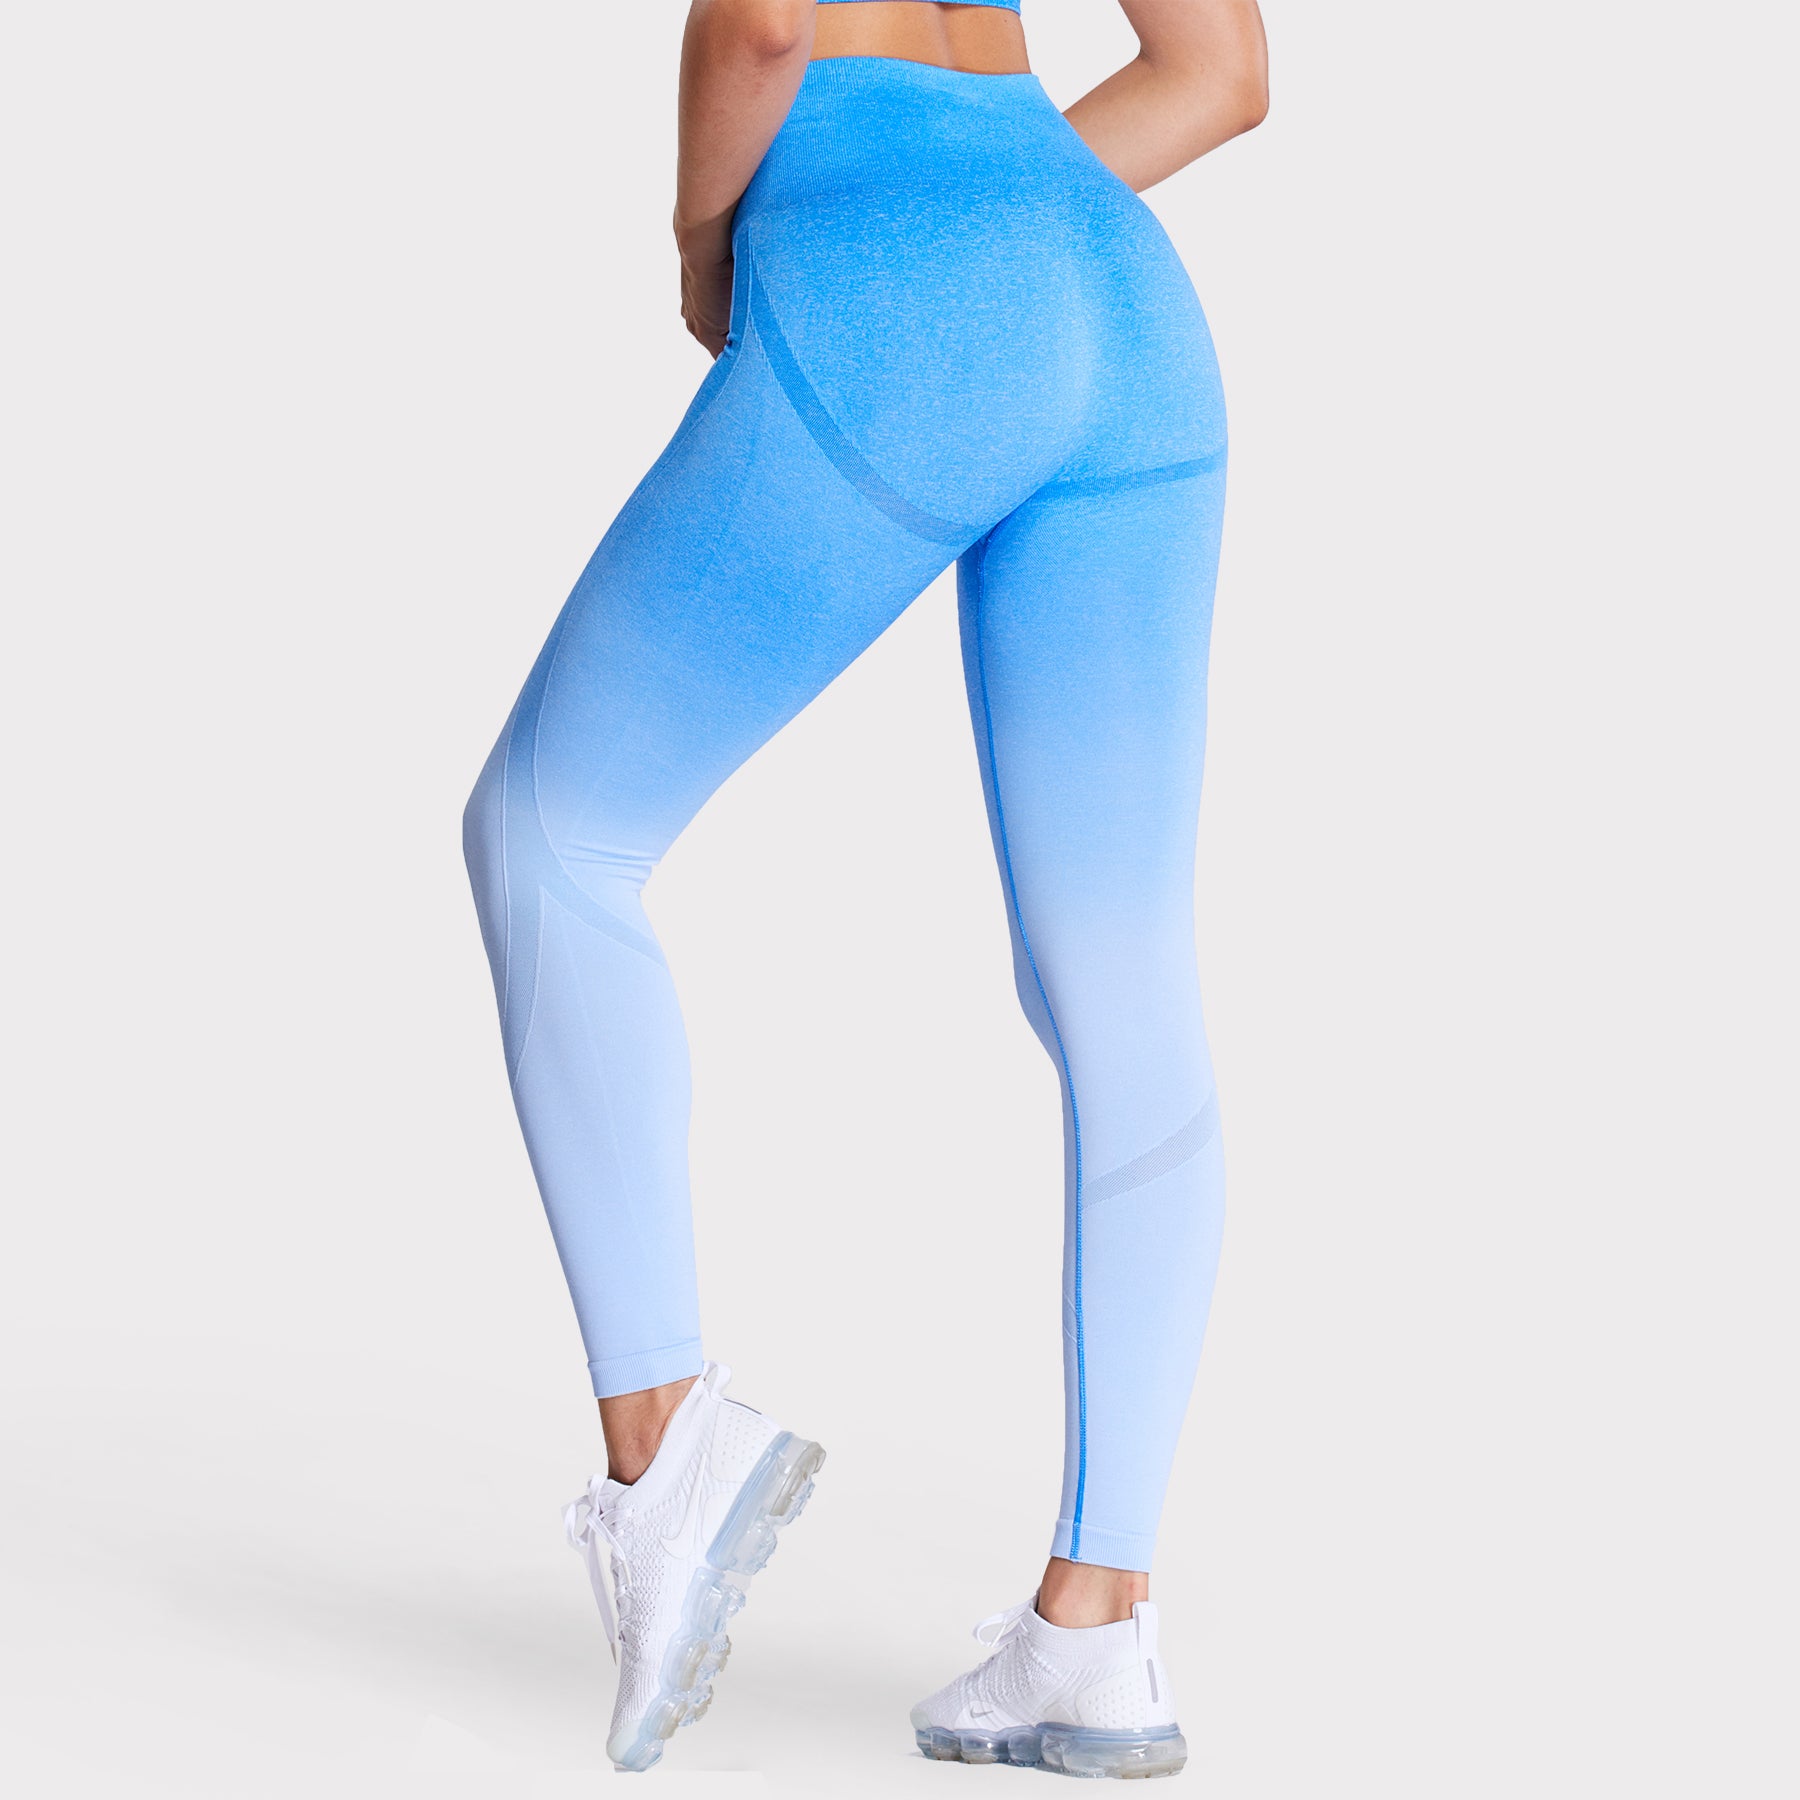 GYMSHARK OMBRE SEAMLESS SET IN ICE BLUE/WHITE, Women's Fashion, New  Undergarments & Loungewear on Carousell